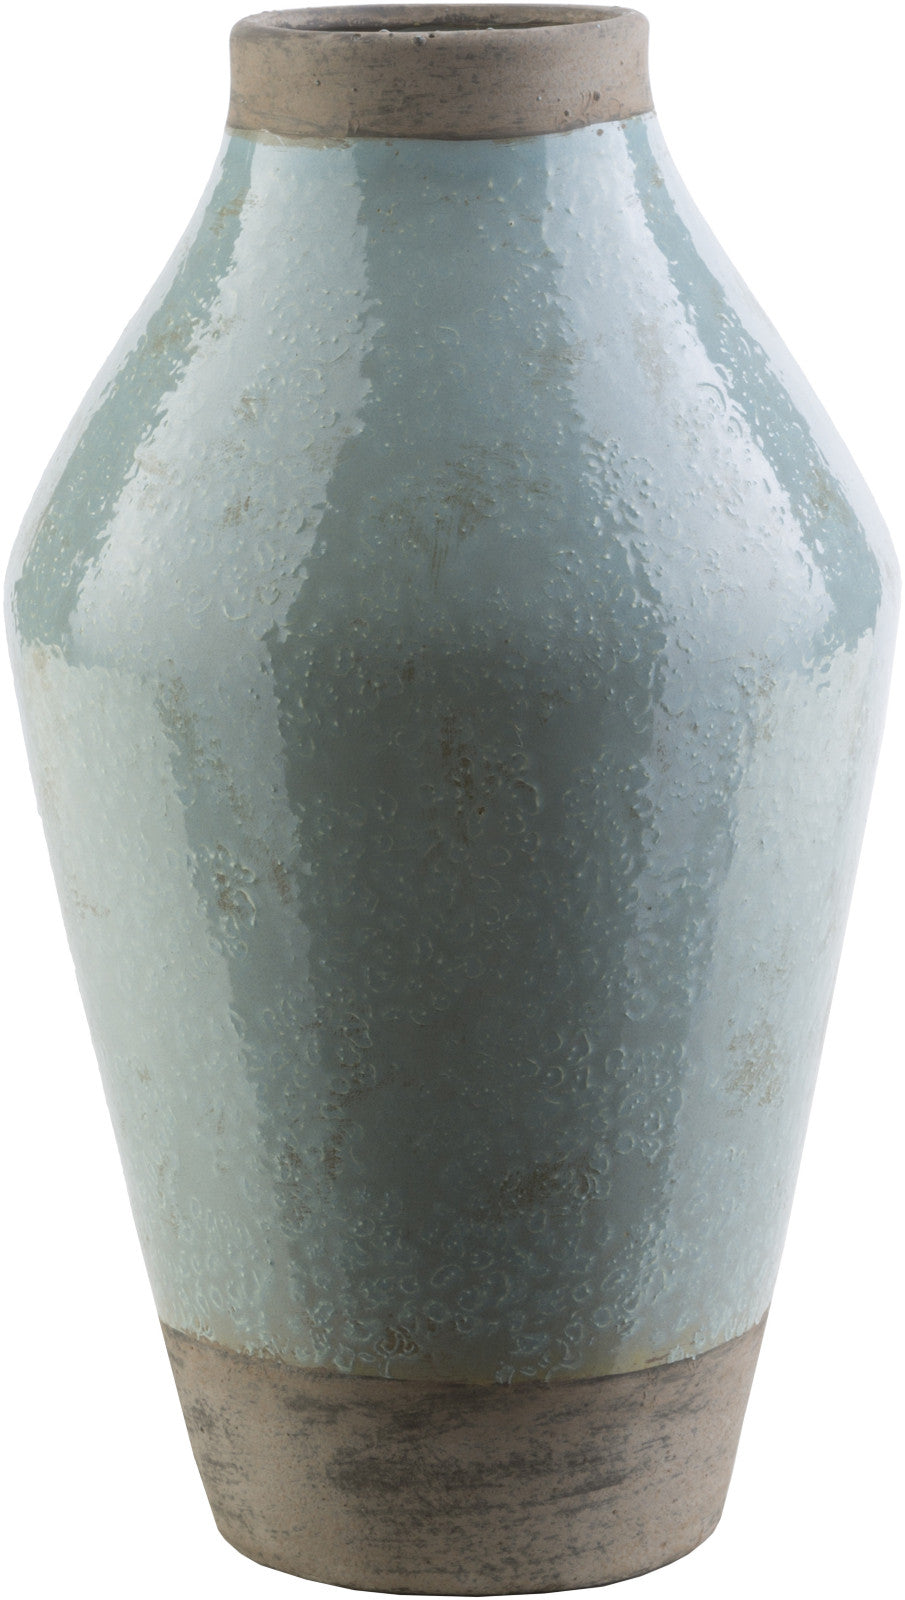 Surya Leclair LCL-600 Vase Small 8.66 X 8.66 X 14.96 inches